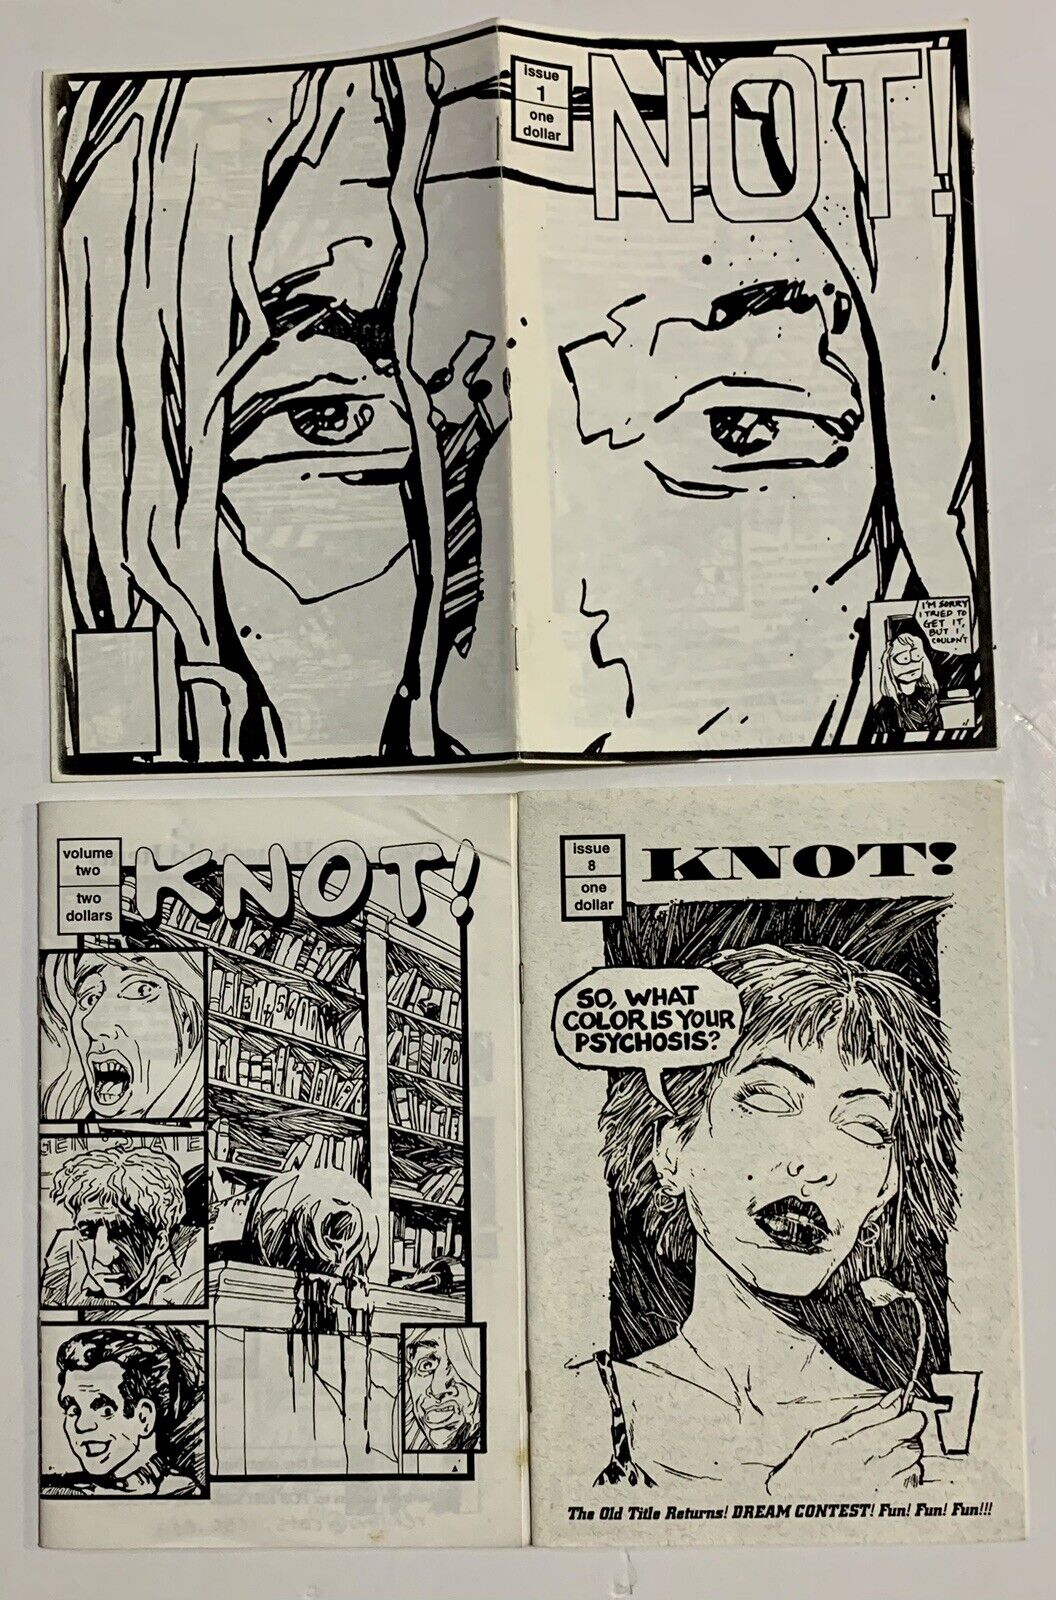 Rare Jesse Reklaw Signed #’d Zine’s NOT #1 1993 KNOT Vol. 2 & Issue 8 1994